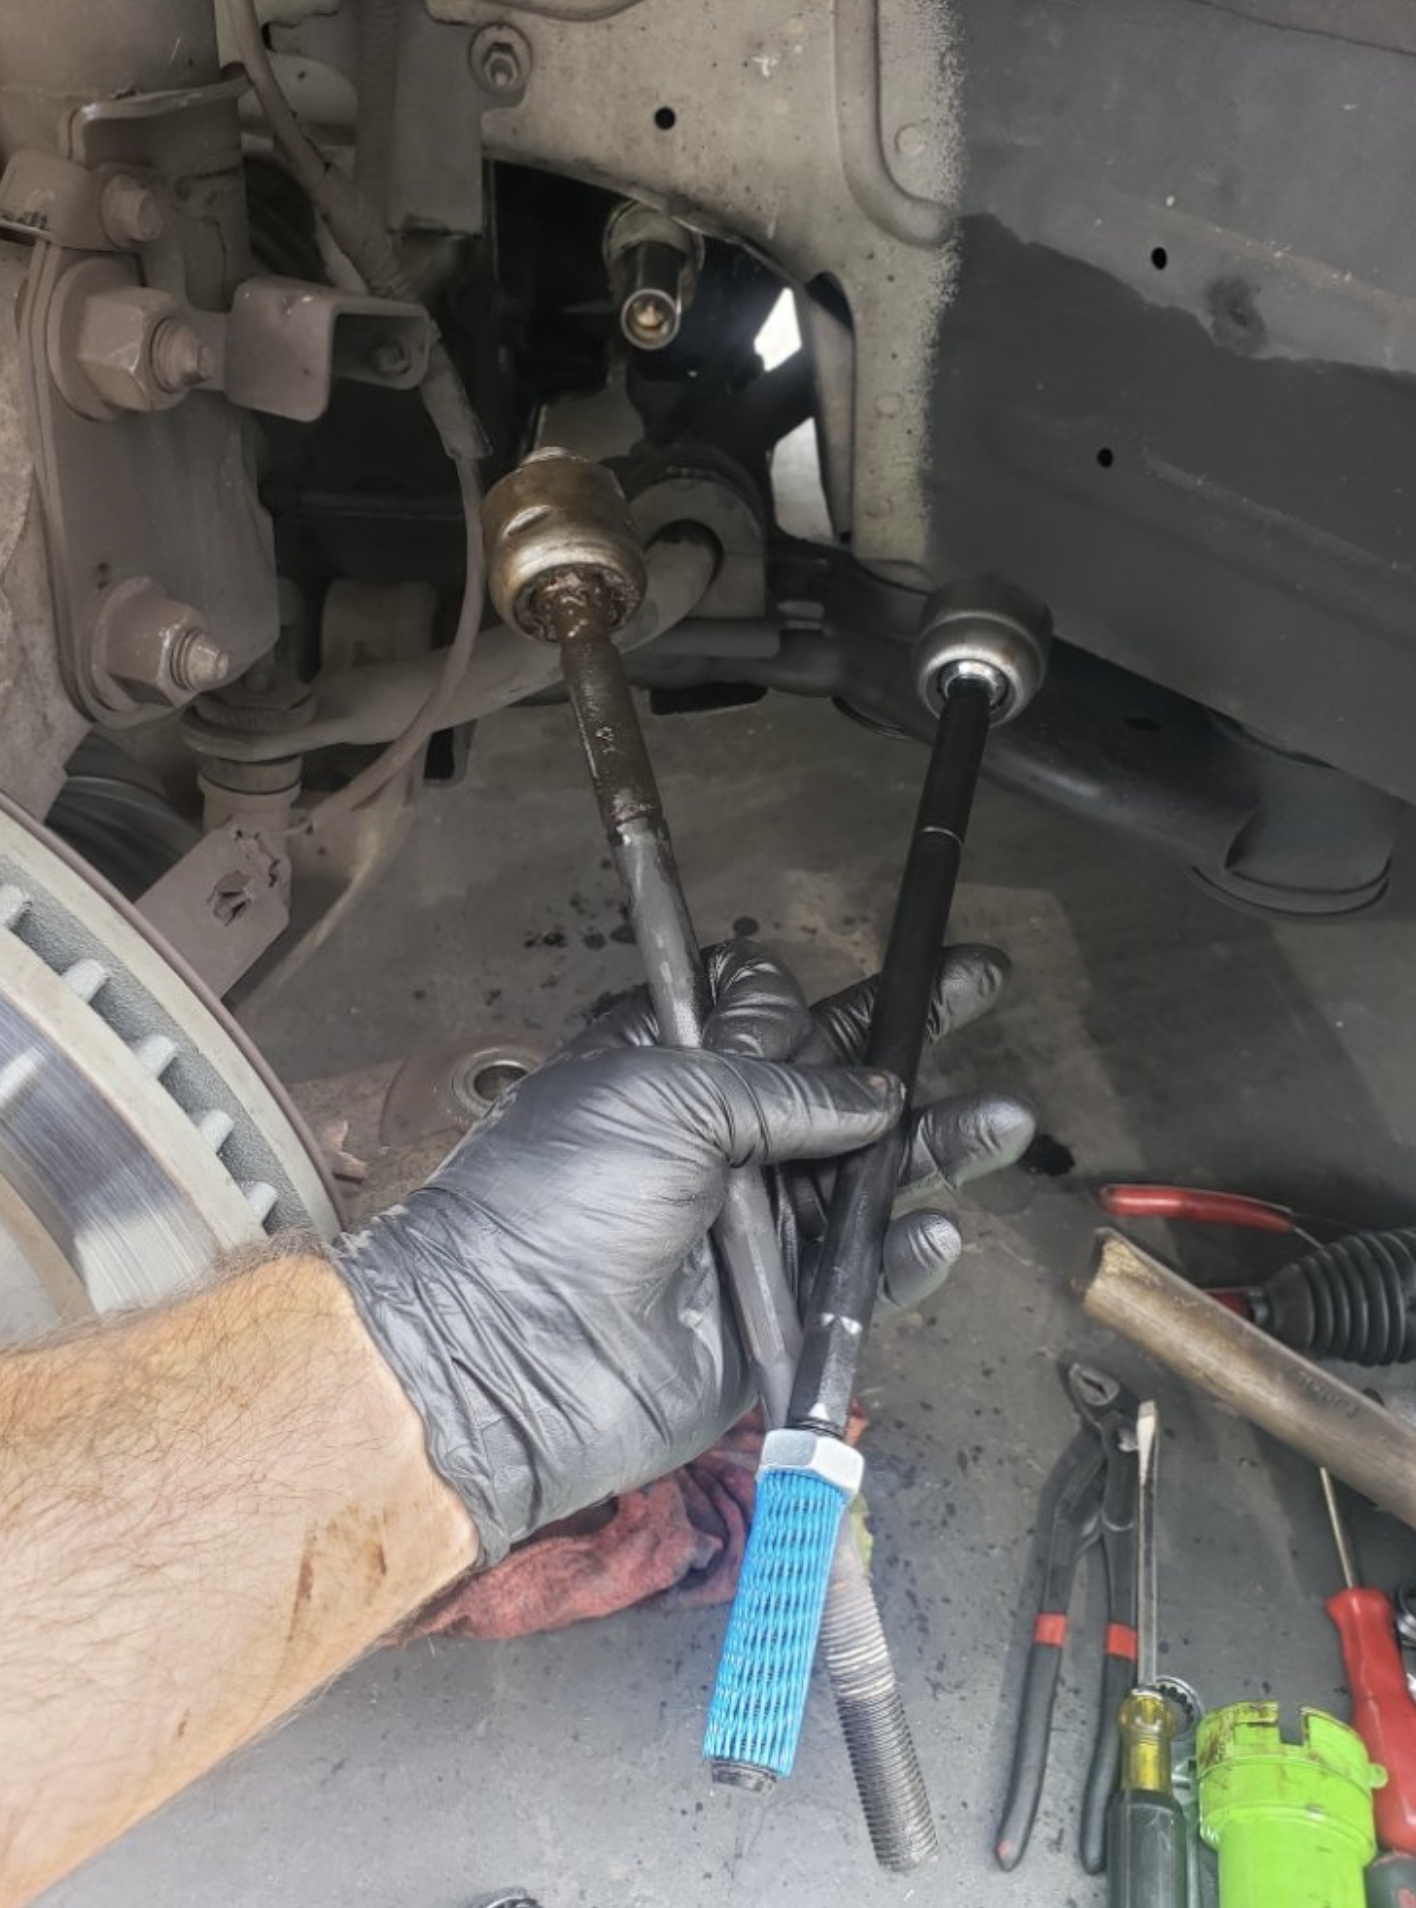 this image shows mobile mechanic services in Garden Grove, California